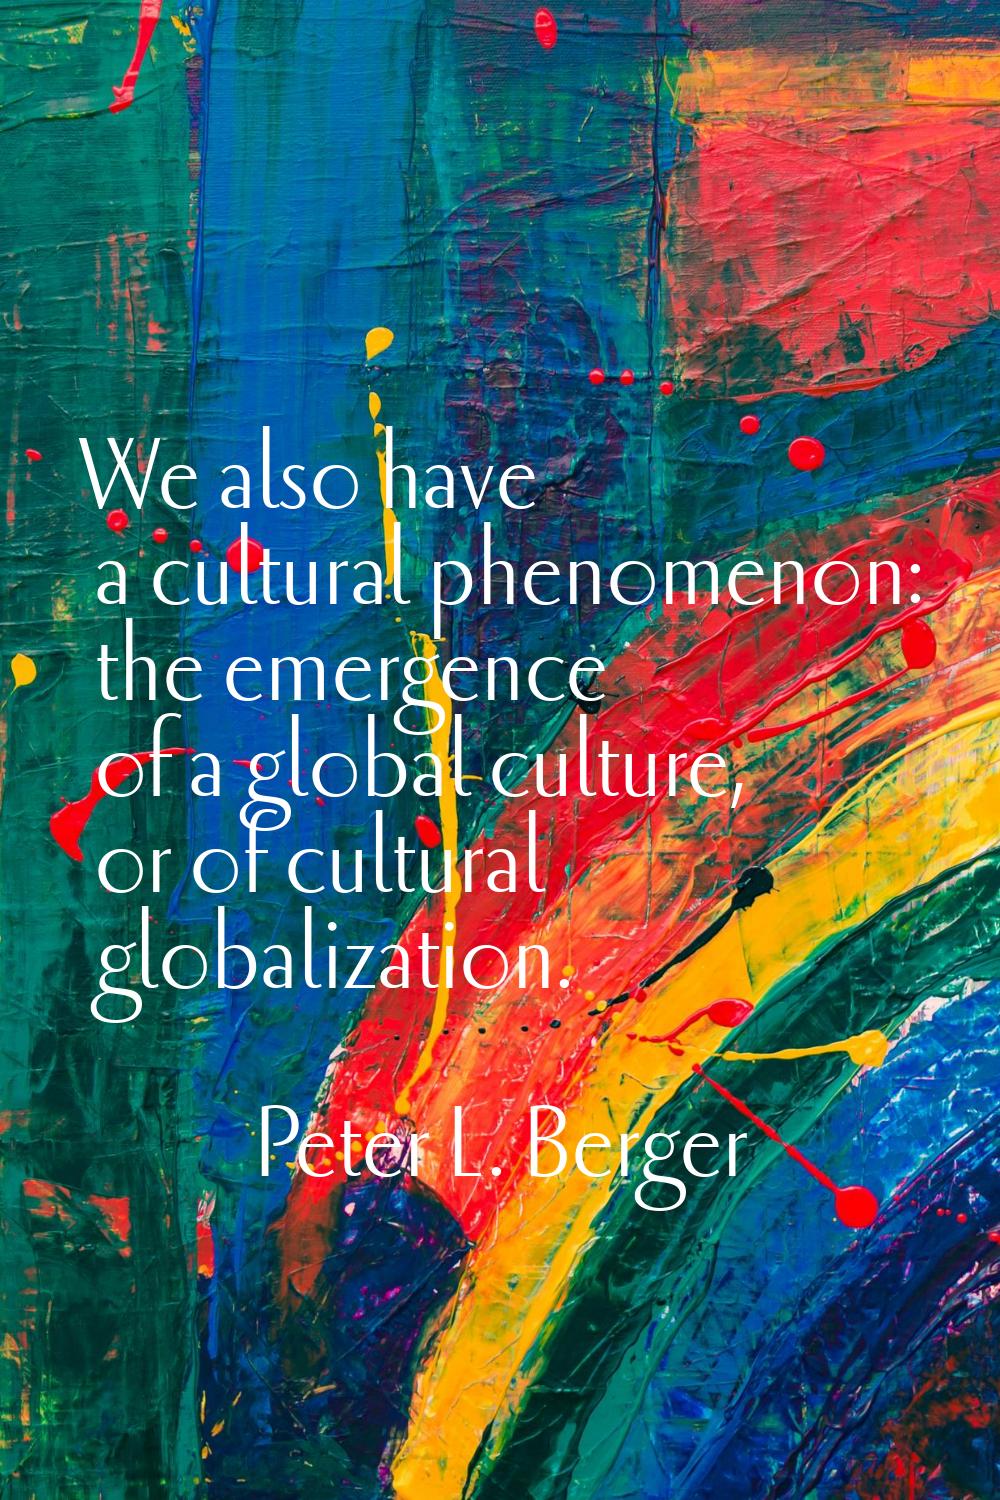 We also have a cultural phenomenon: the emergence of a global culture, or of cultural globalization